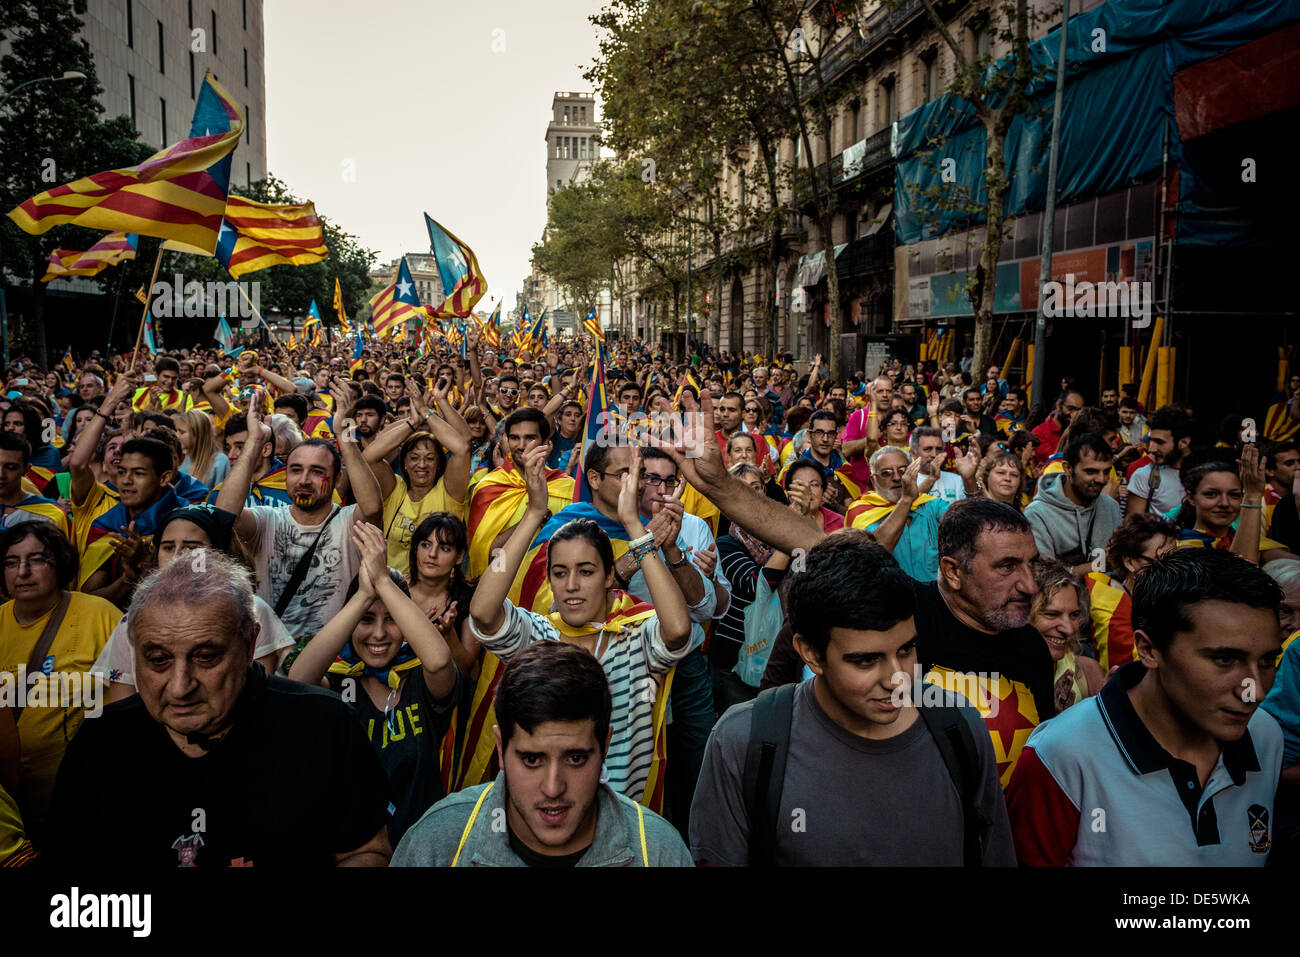 Barcelona, Spain. September 11th, 2013: Thousands gather in the streets of Barcelona to demand the independence of Catalonia on its national day © matthi/Alamy Live News Stock Photo